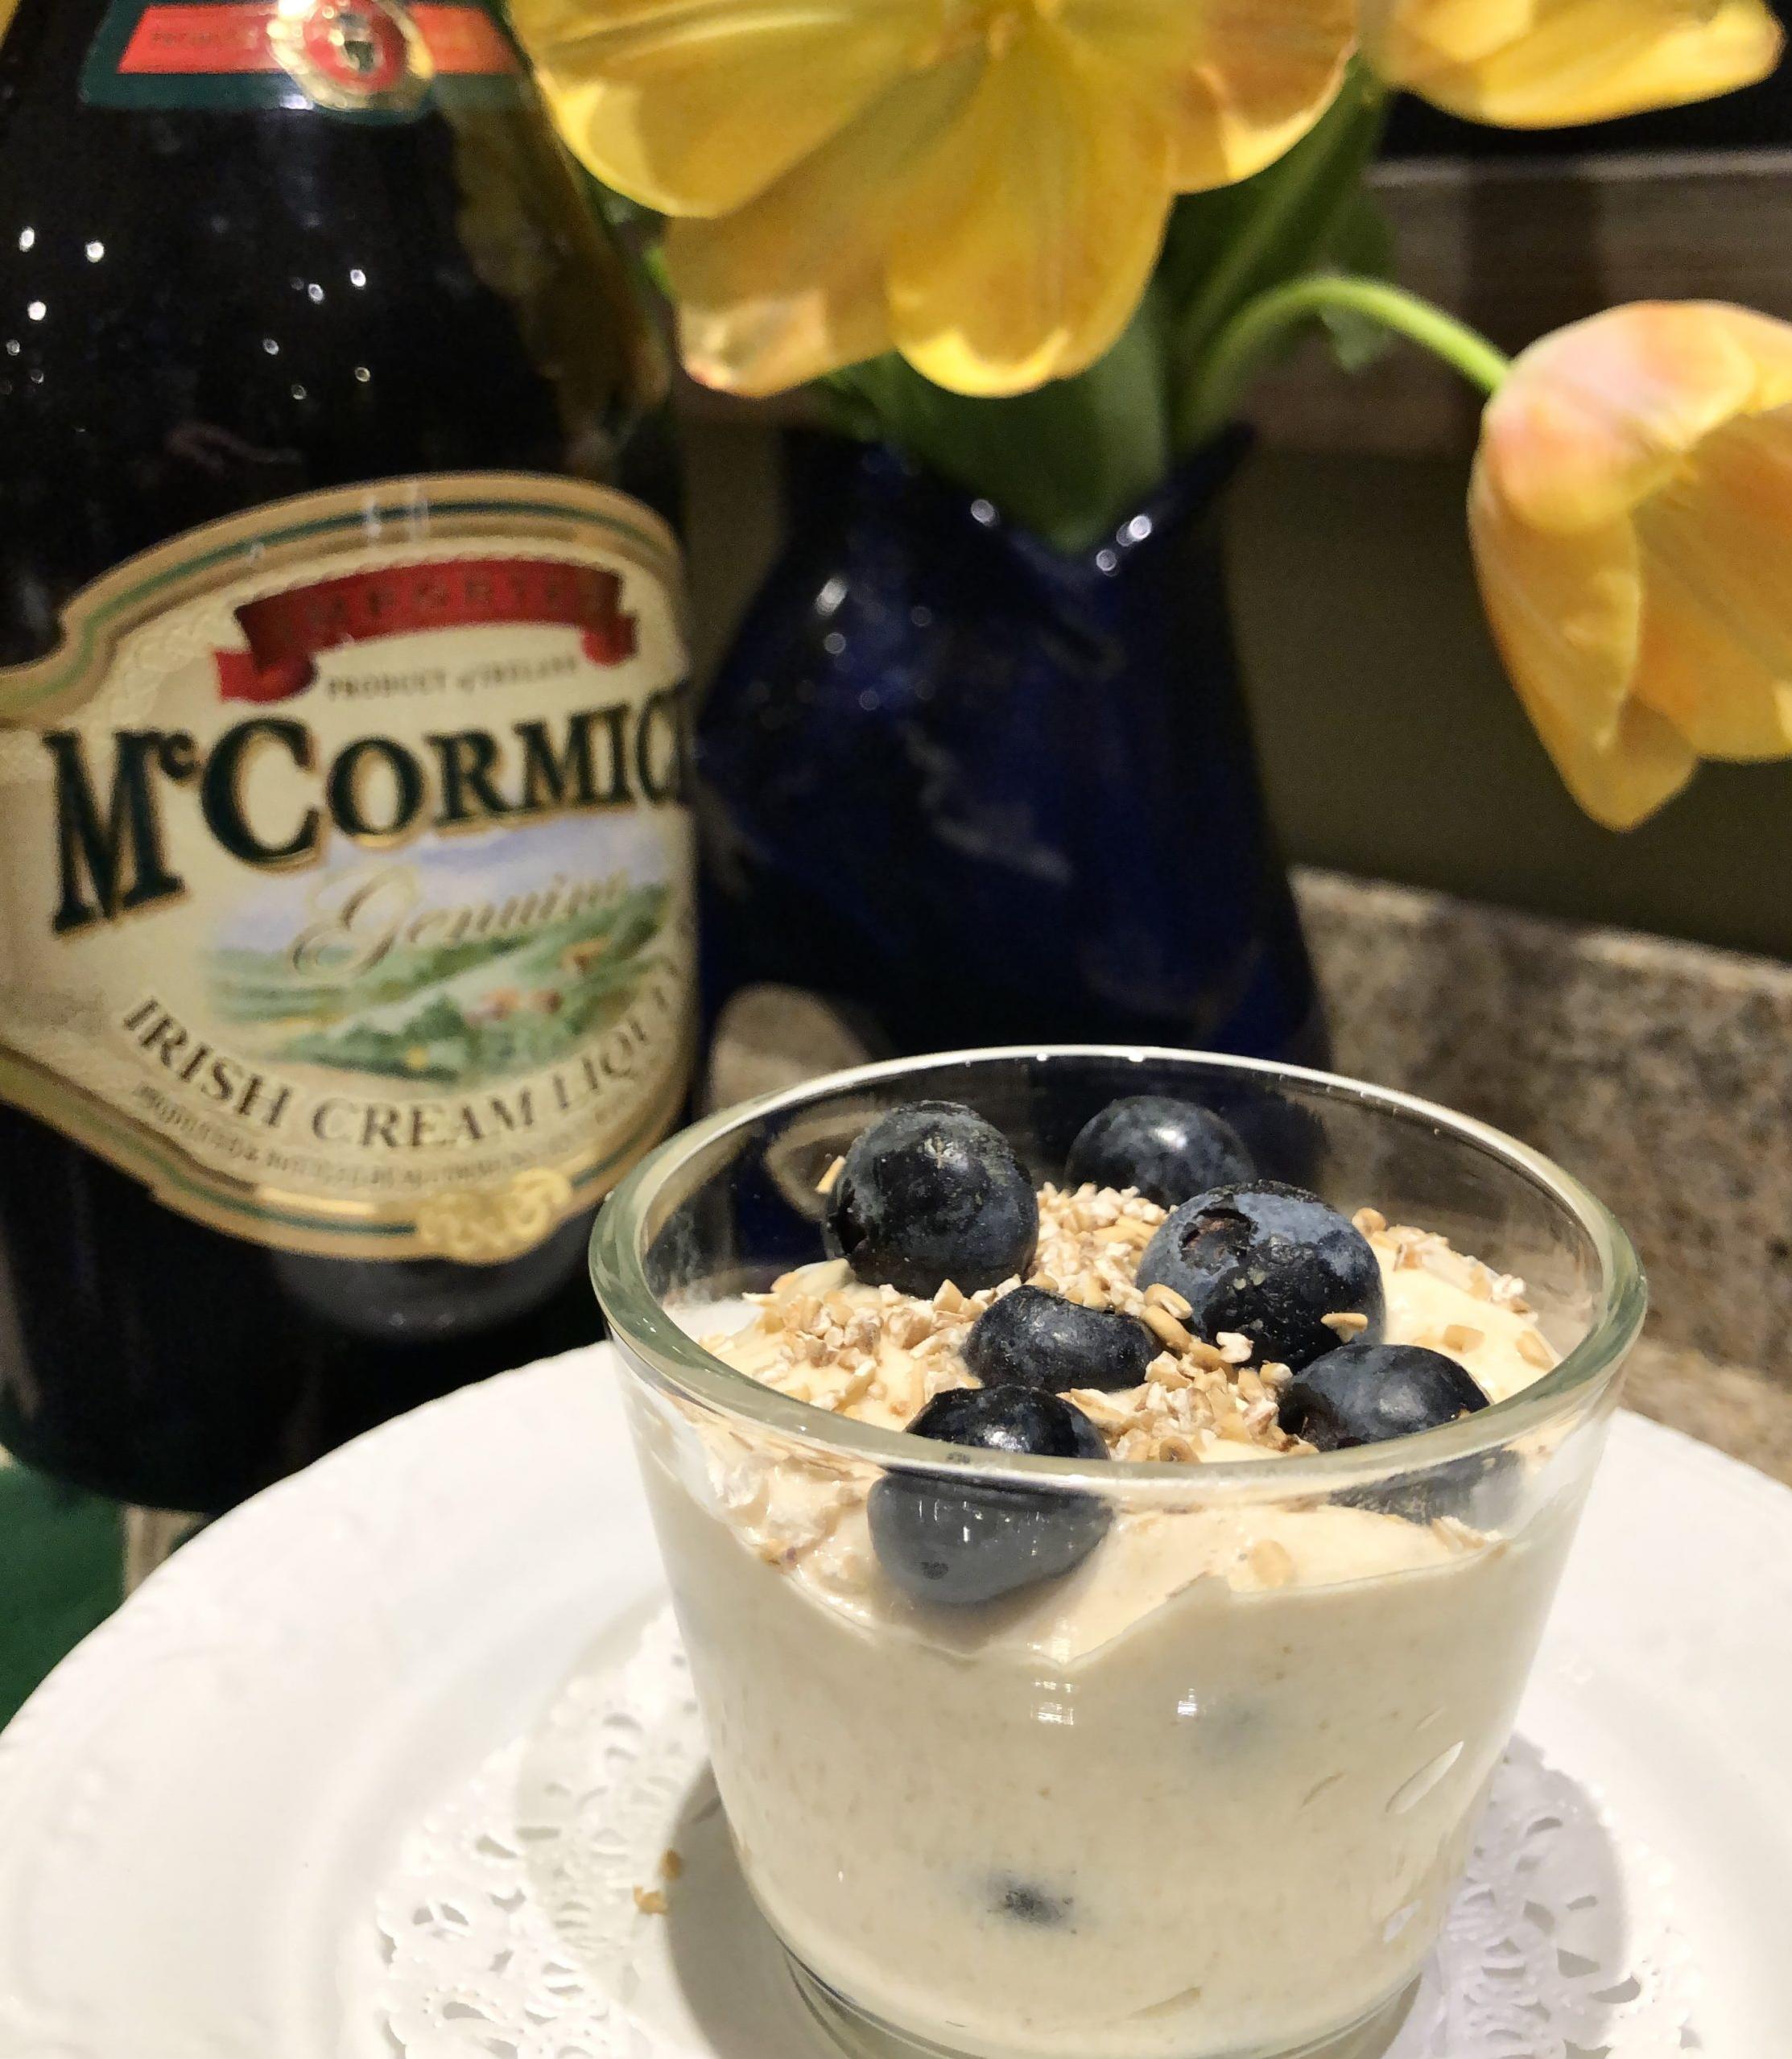  The sweet and tangy flavors of blueberries and Bailey's Irish Cream meld perfectly in this dessert